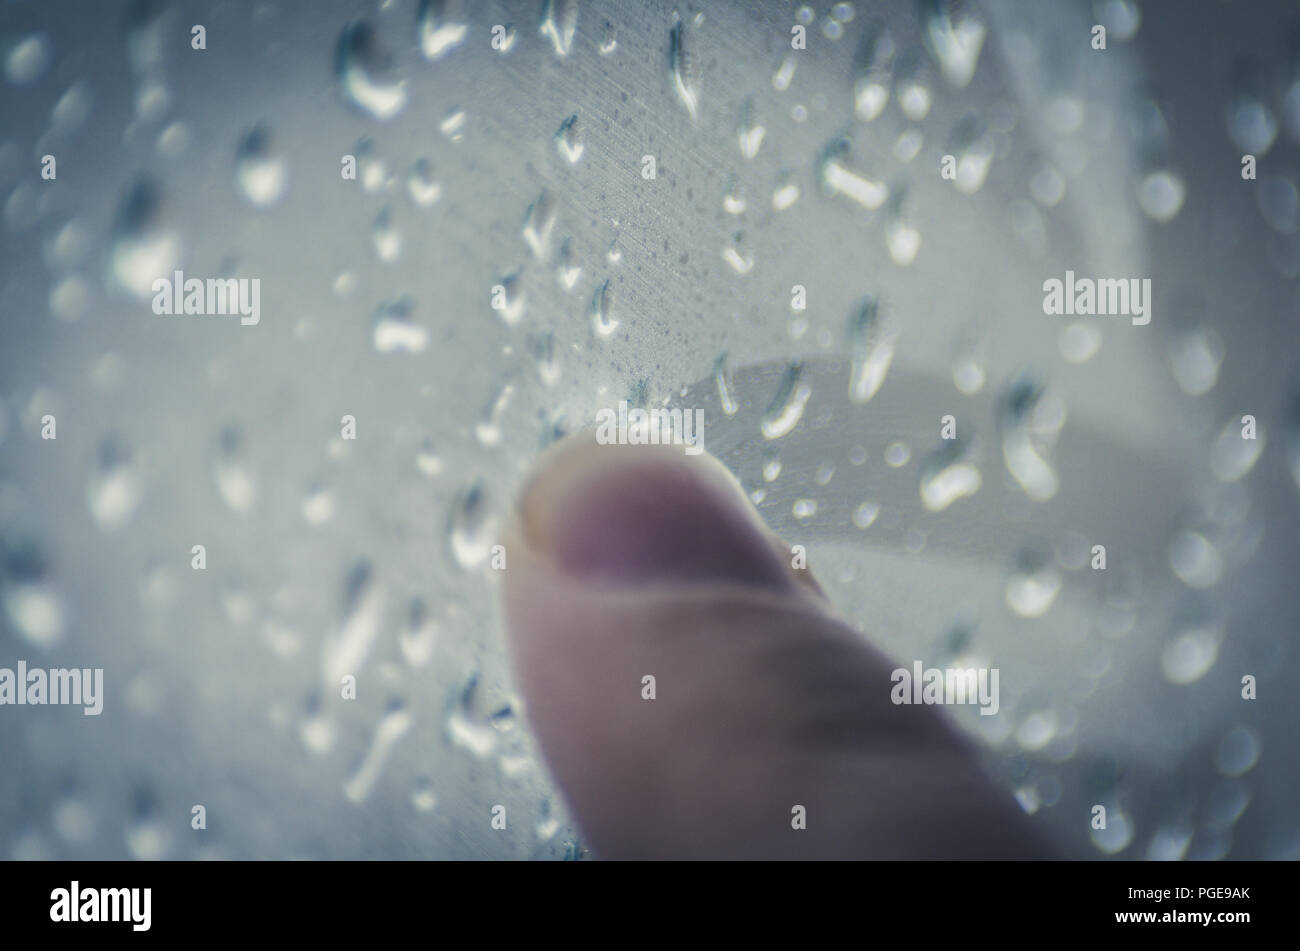 Moody Feelings Concept: Finger Of A Teenager Drawing On The Window With Raindrops On A Rainy Day Stock Photo